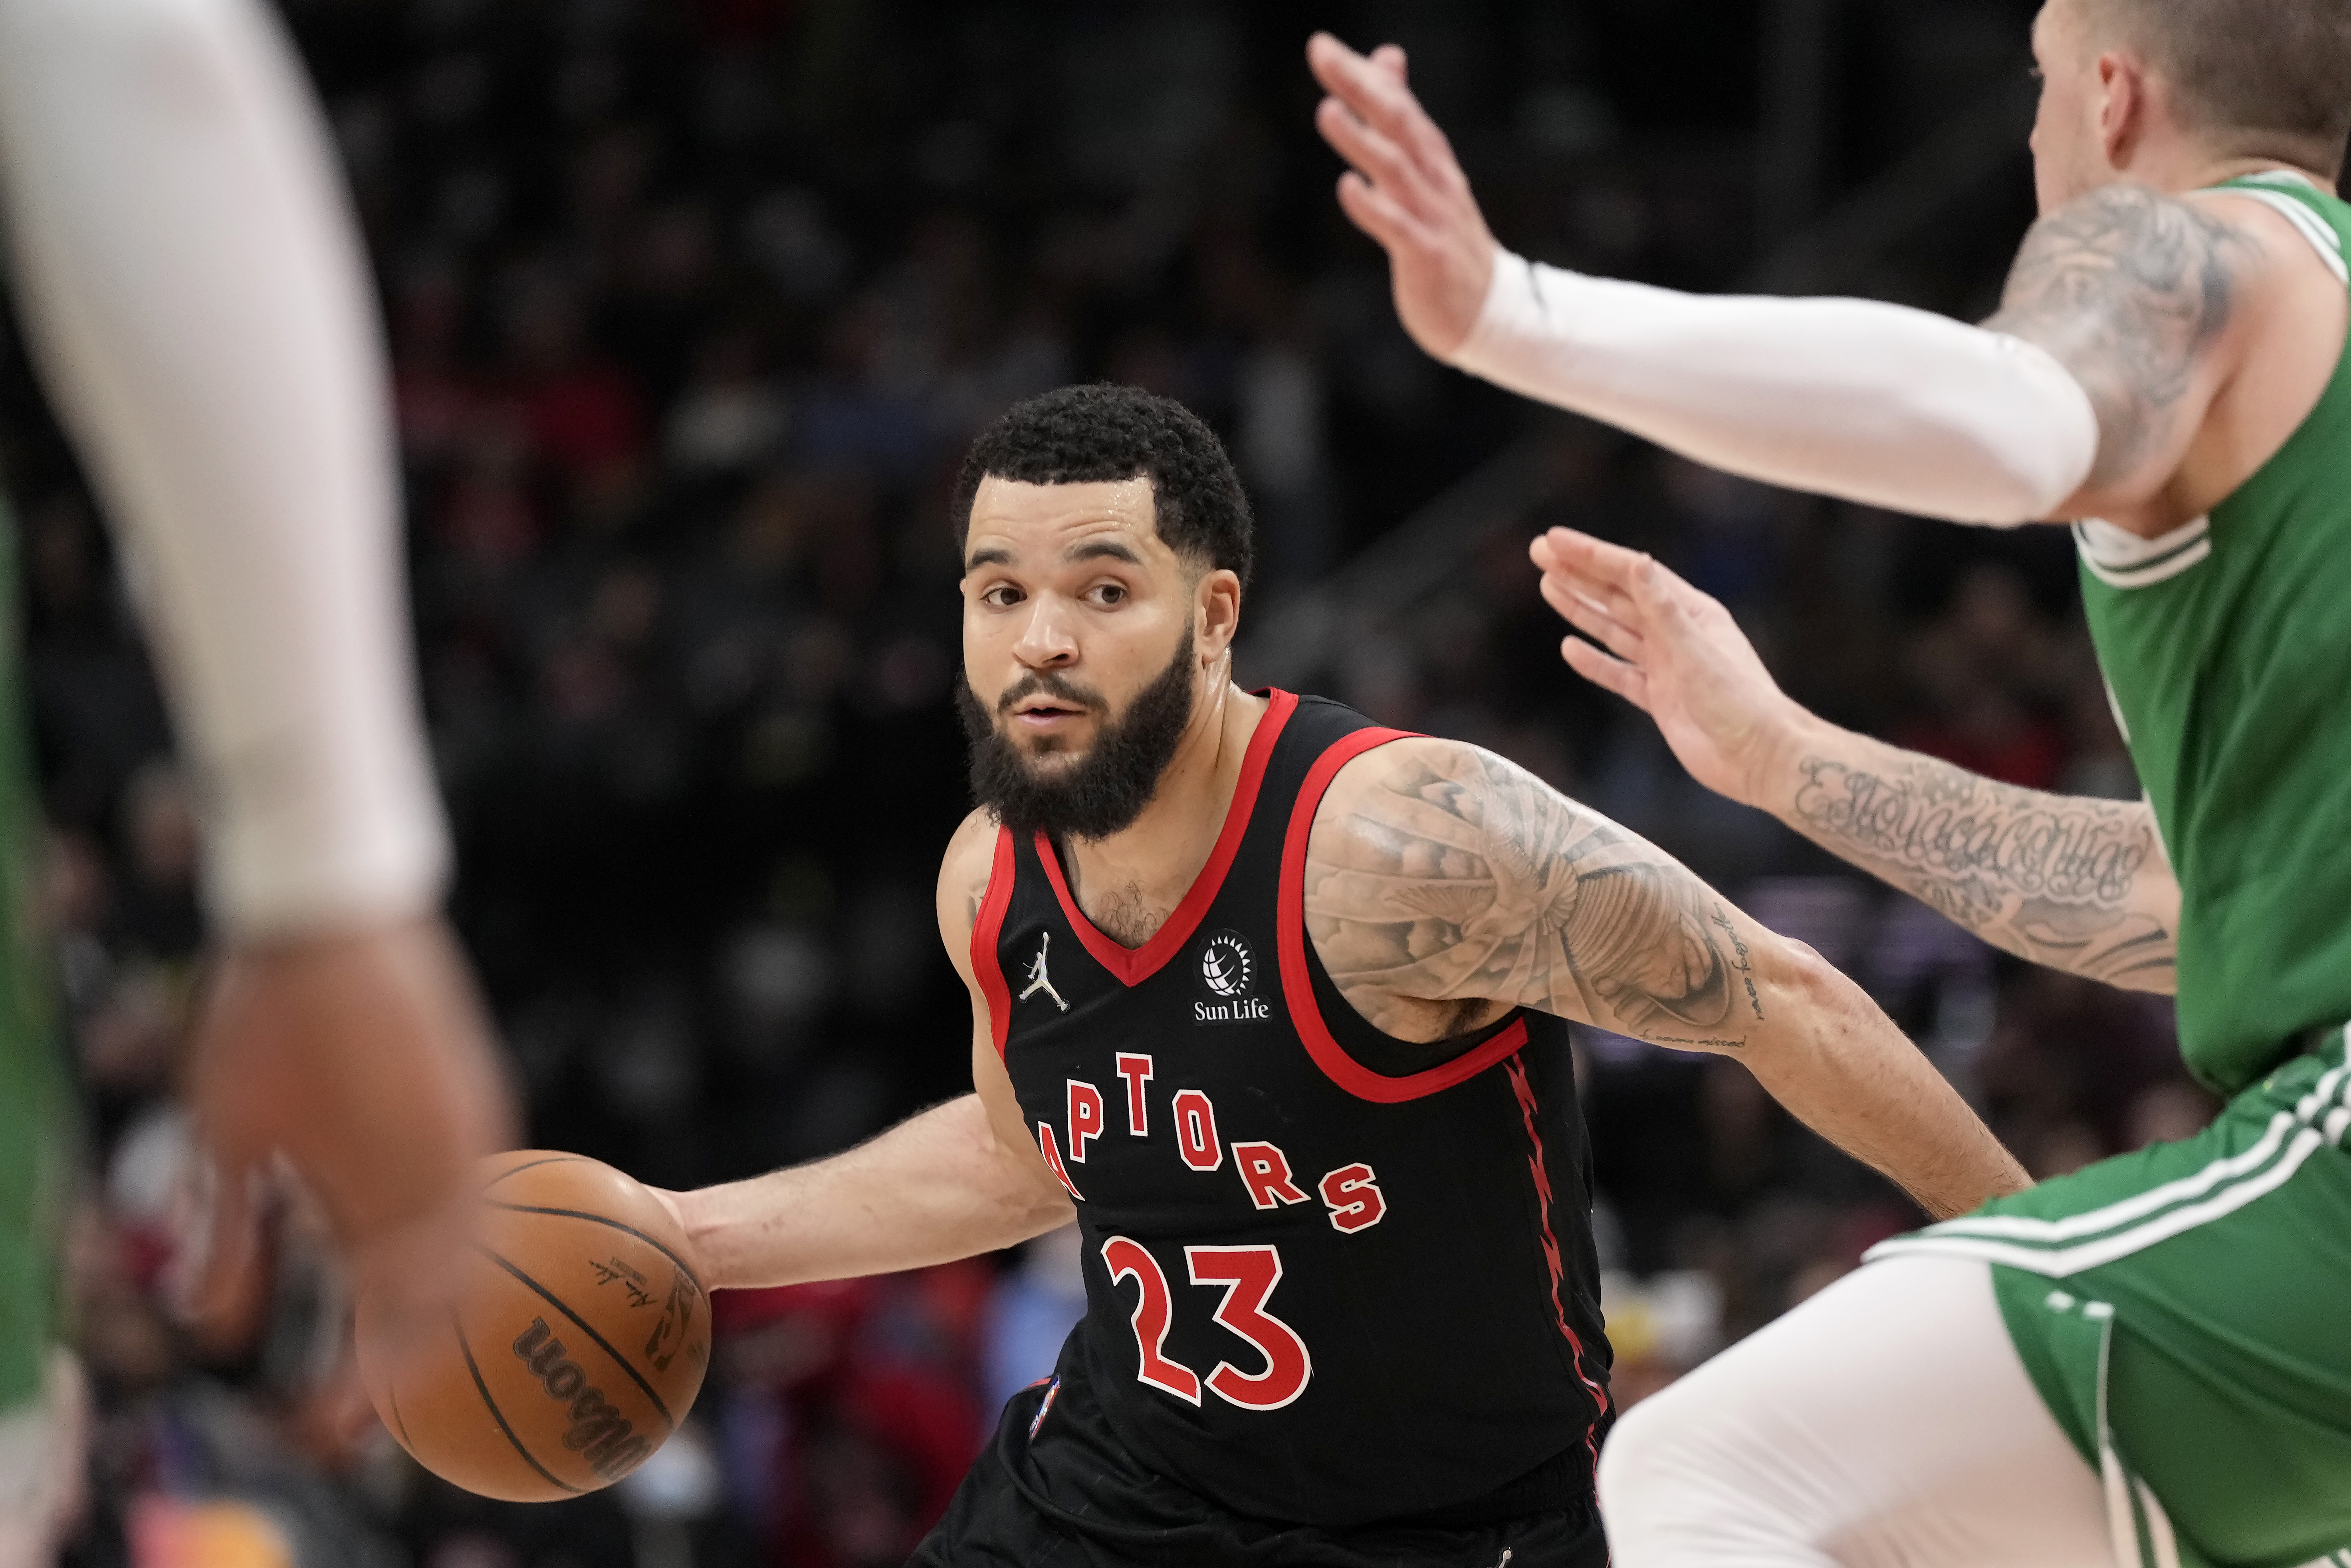 Fred VanVleet discusses injury recovery, Raptors' future and social justice